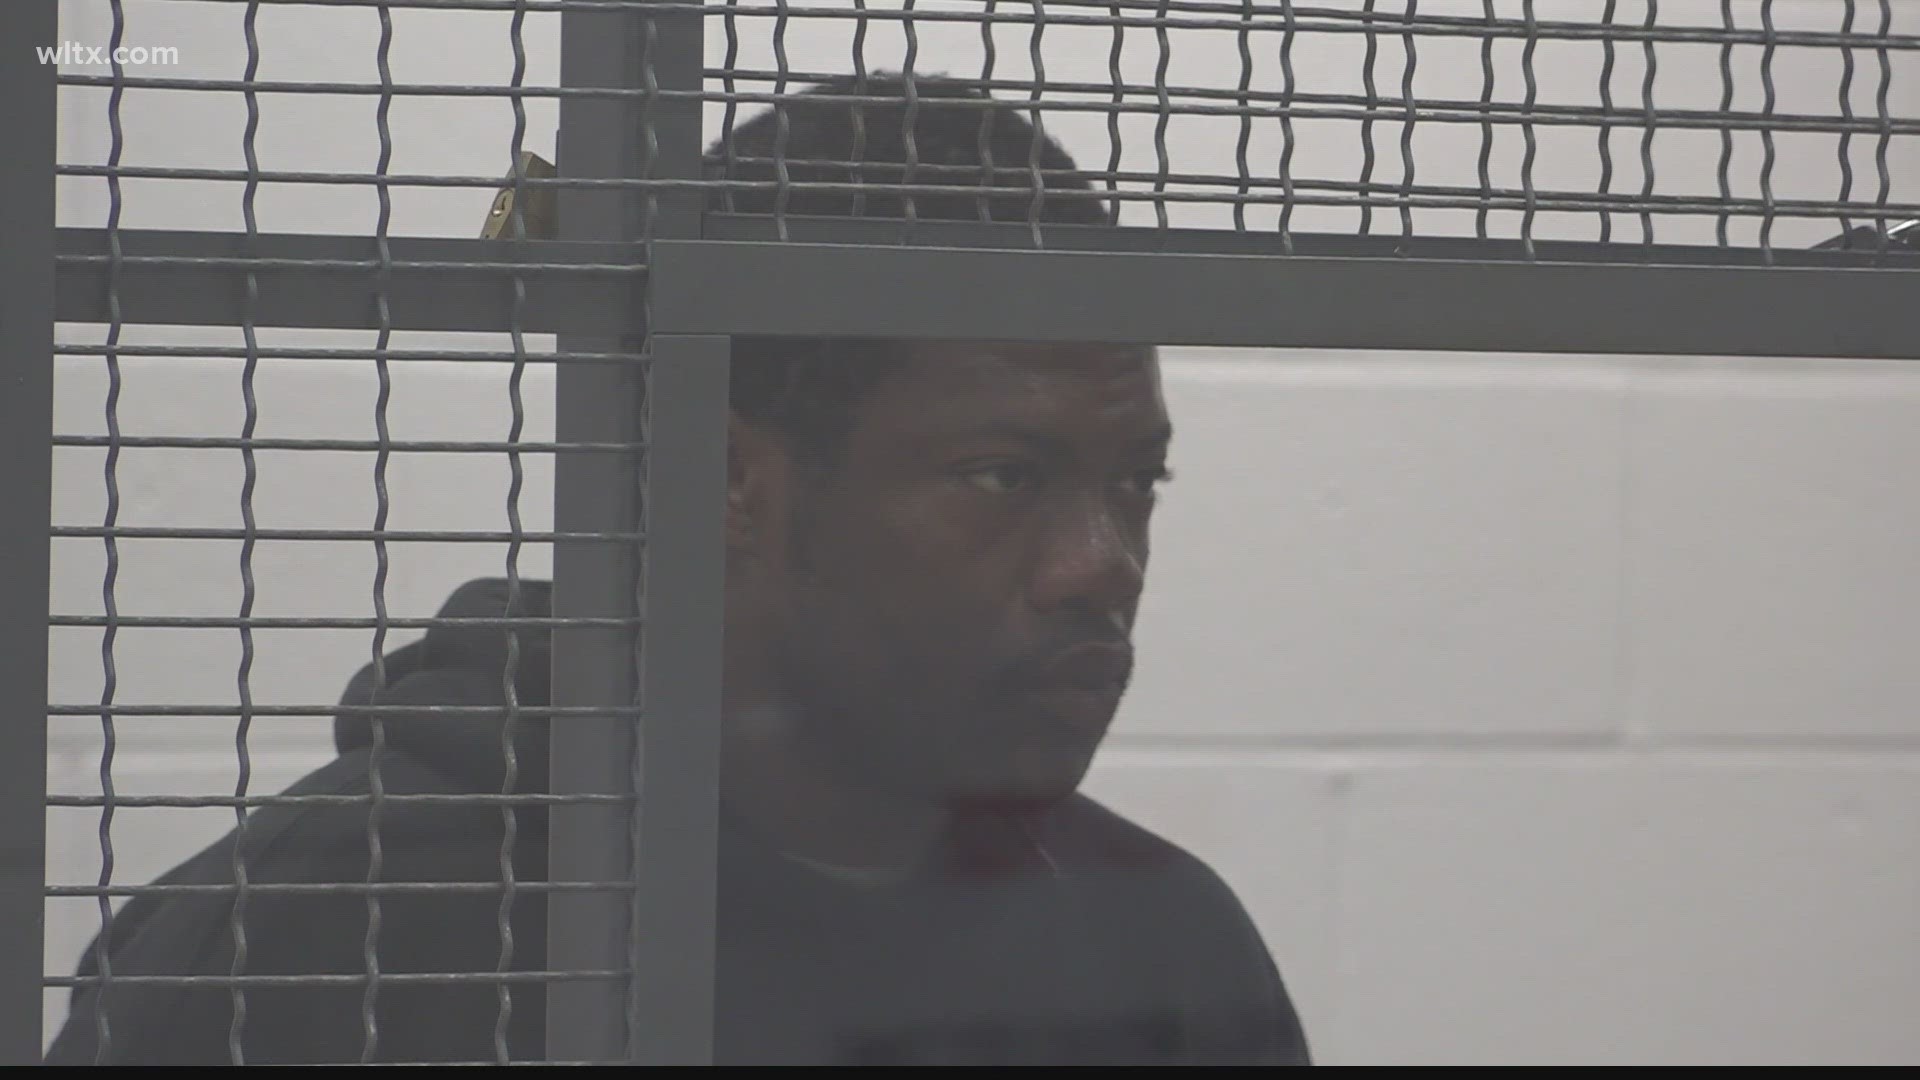 DaQuan Williams, 35, appeared in court charged with kidnapping and criminal sexual conduct for an Irmo incident, police believe their could be more.